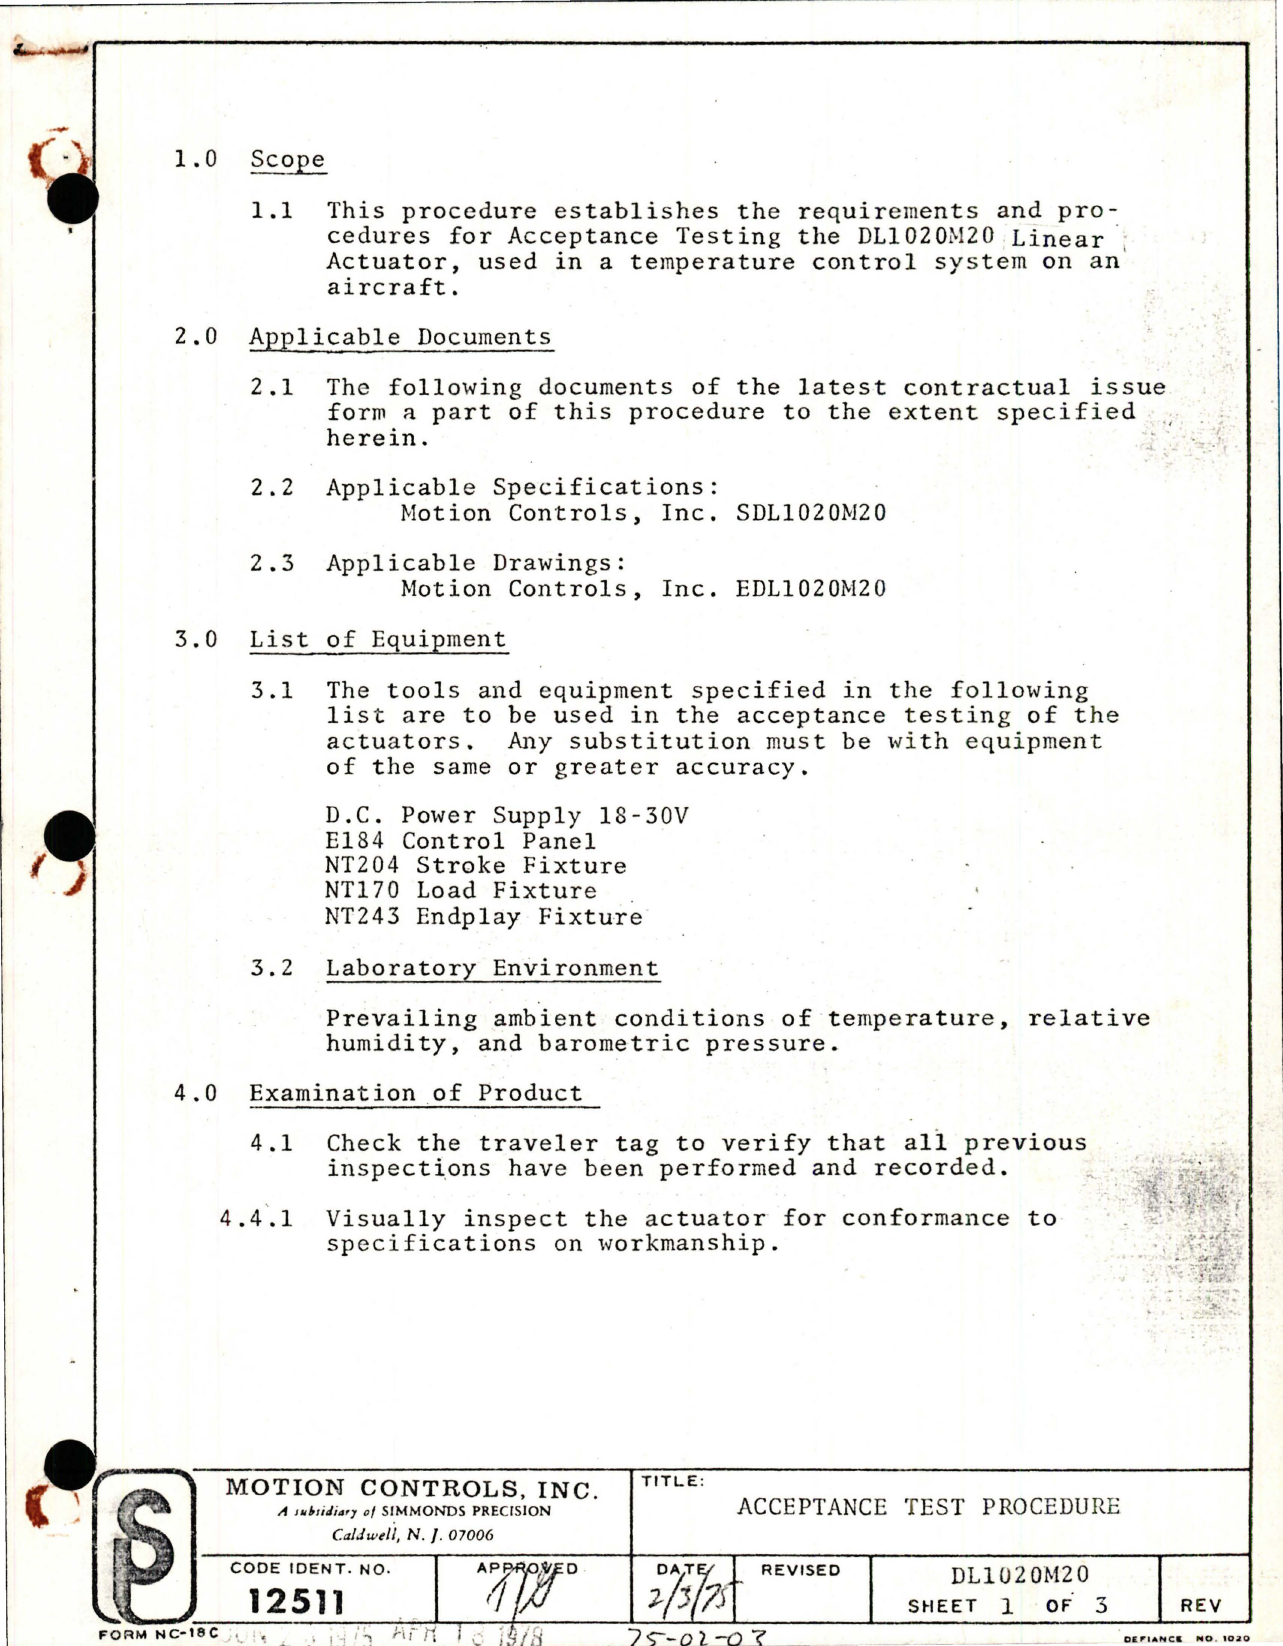 Sample page 1 from AirCorps Library document: Acceptance Test Procedure for Linear Actuator Temperature Control System - DL1020M20